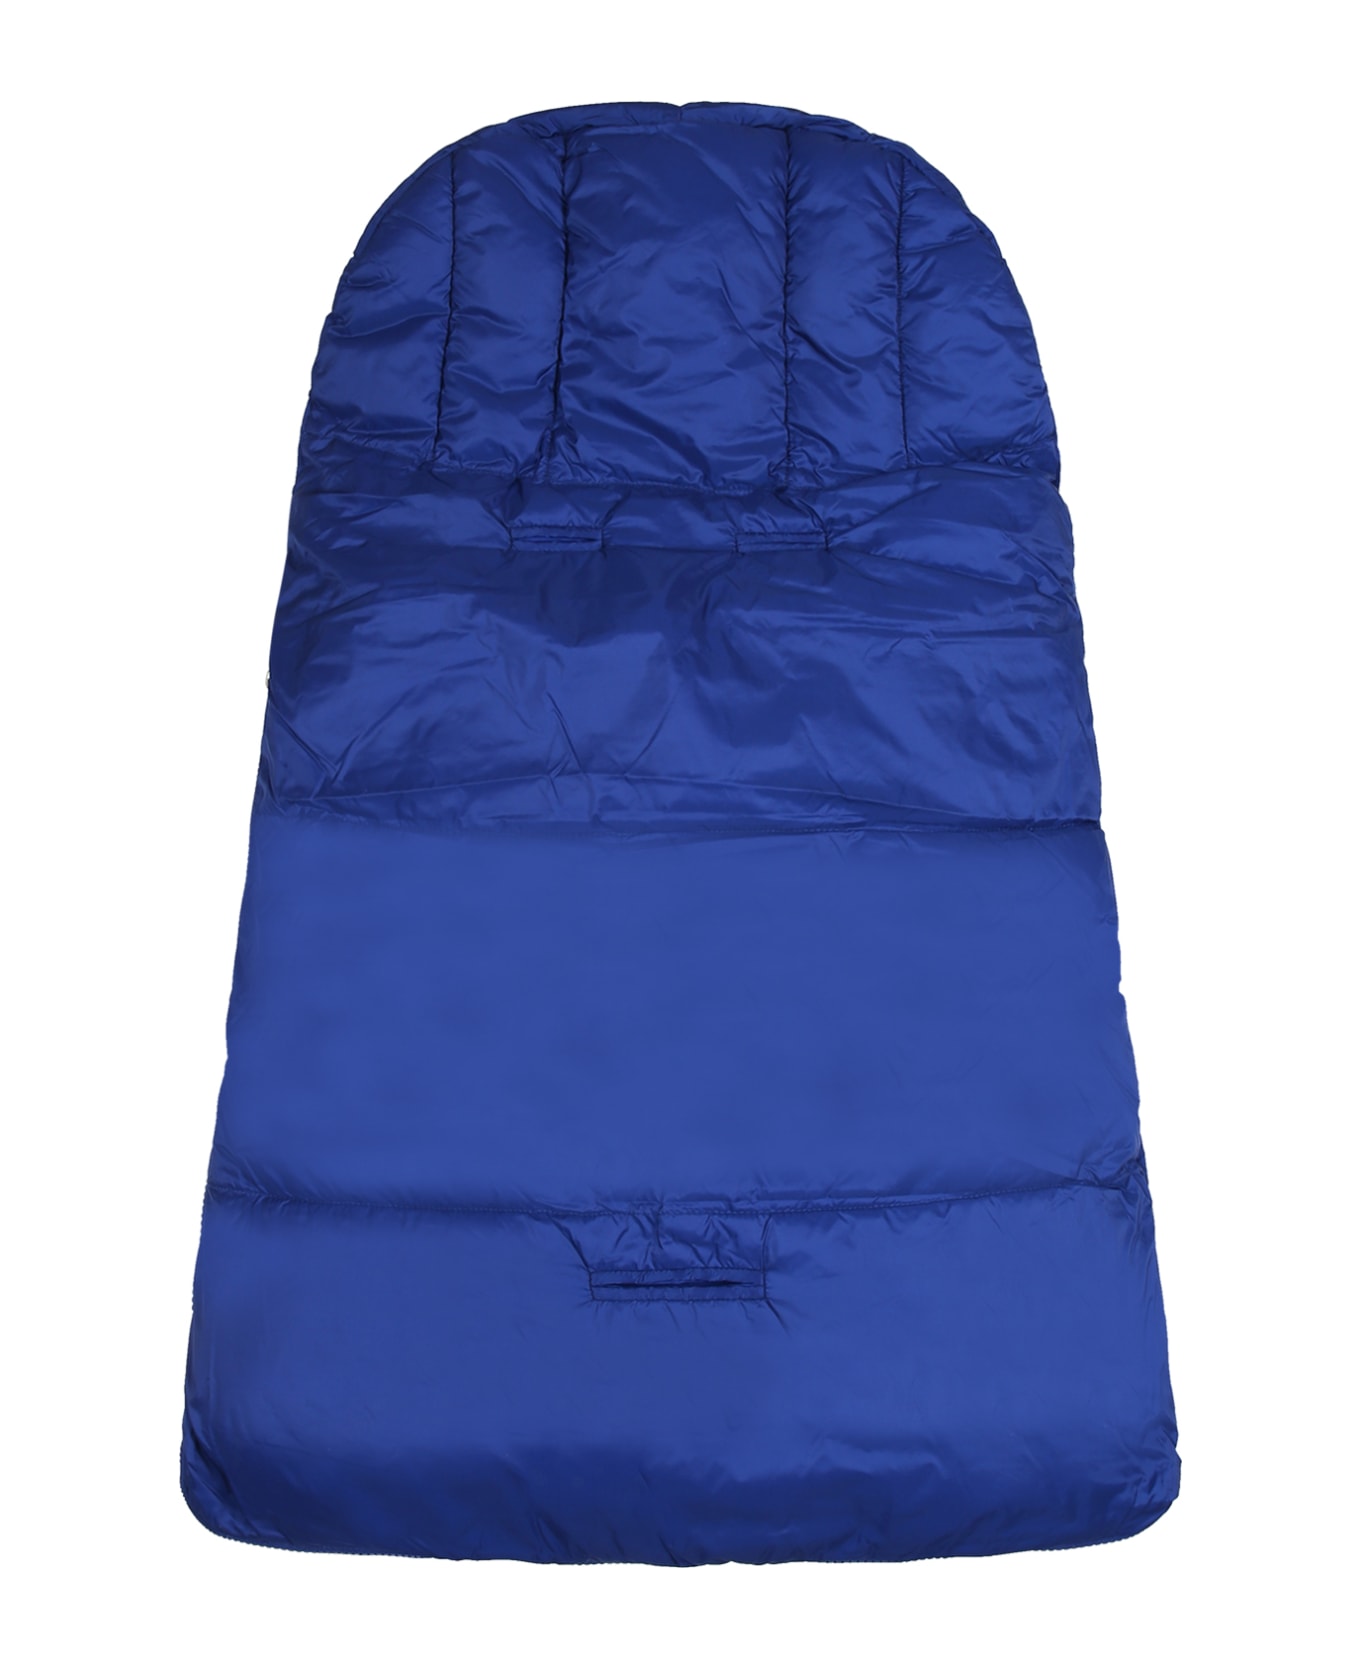 Moschino Blue Sleeping Bag For Baby Boy With Teddy Bear And Logo - Light Blue